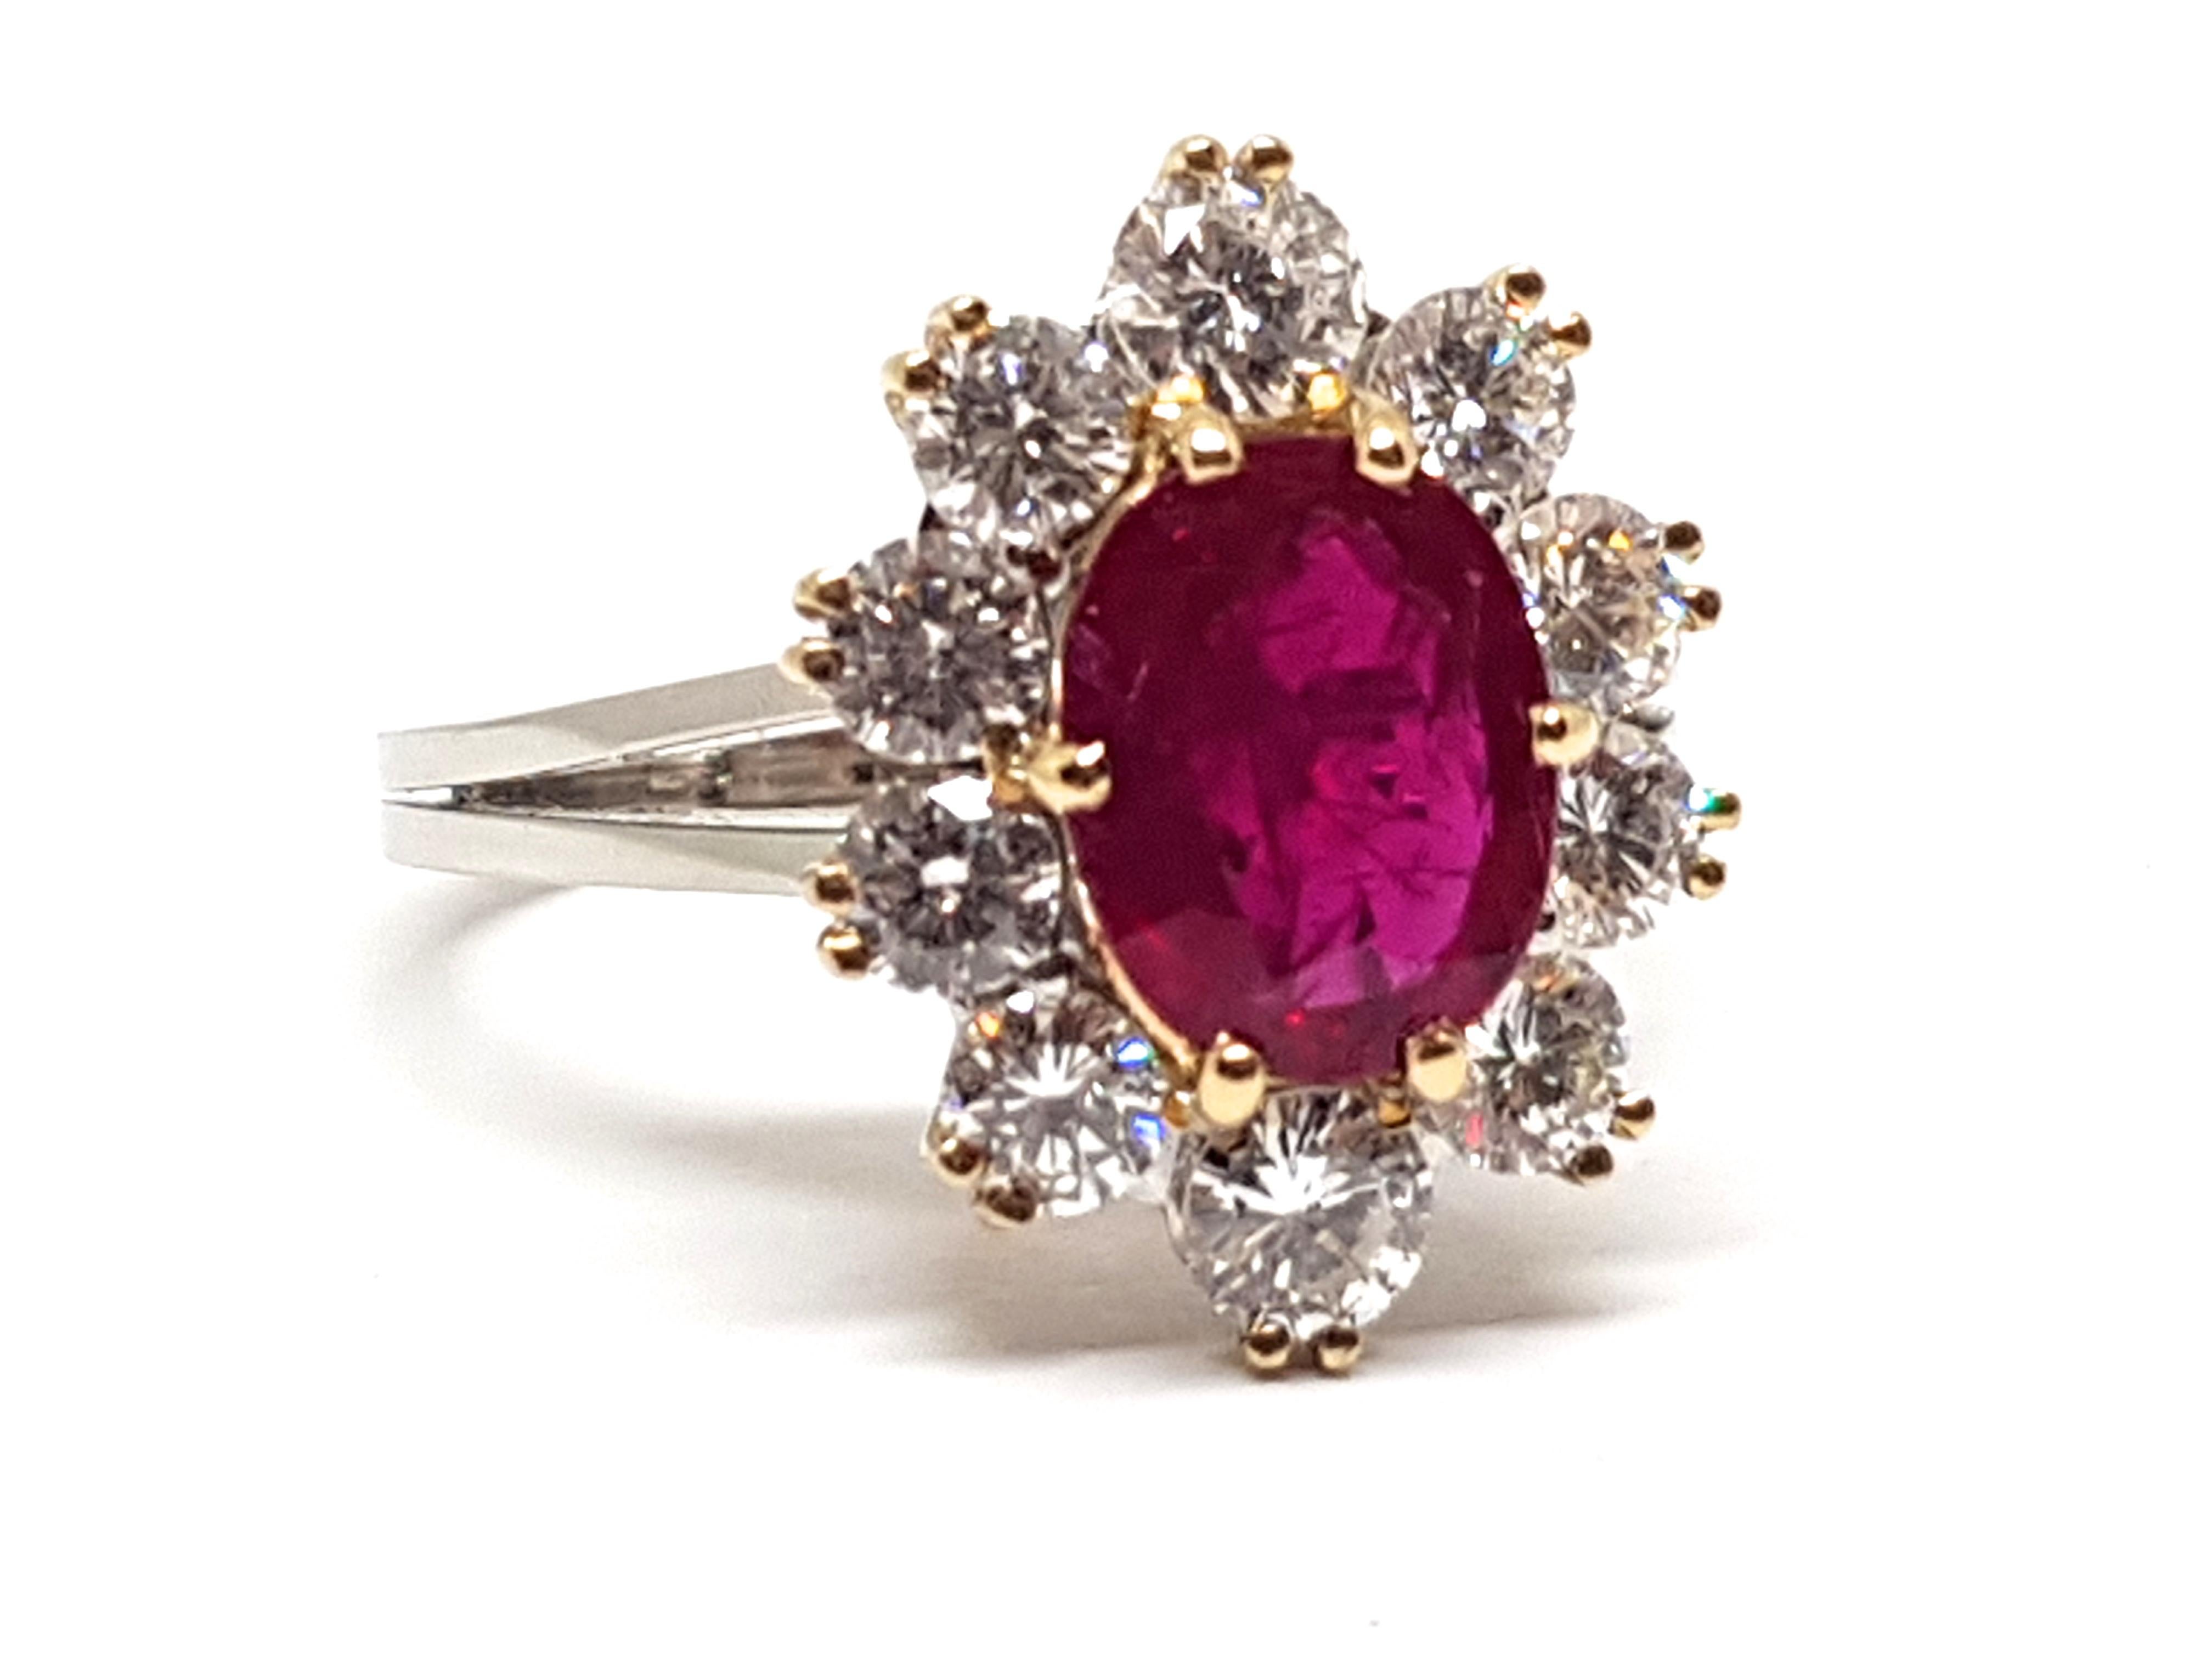 Gold: 18 Karat Yellow & White Gold 
Weight: 6.00 grams.
Diamond: 1.20 ct. Colour: E clarity: VVS1
Natural Ruby: approx. 1.50ct.
Width: 0.66 inches.
Ring size: US 6.50
Free resizing of Ring up to size US 13
All our jewellery comes with a certificate